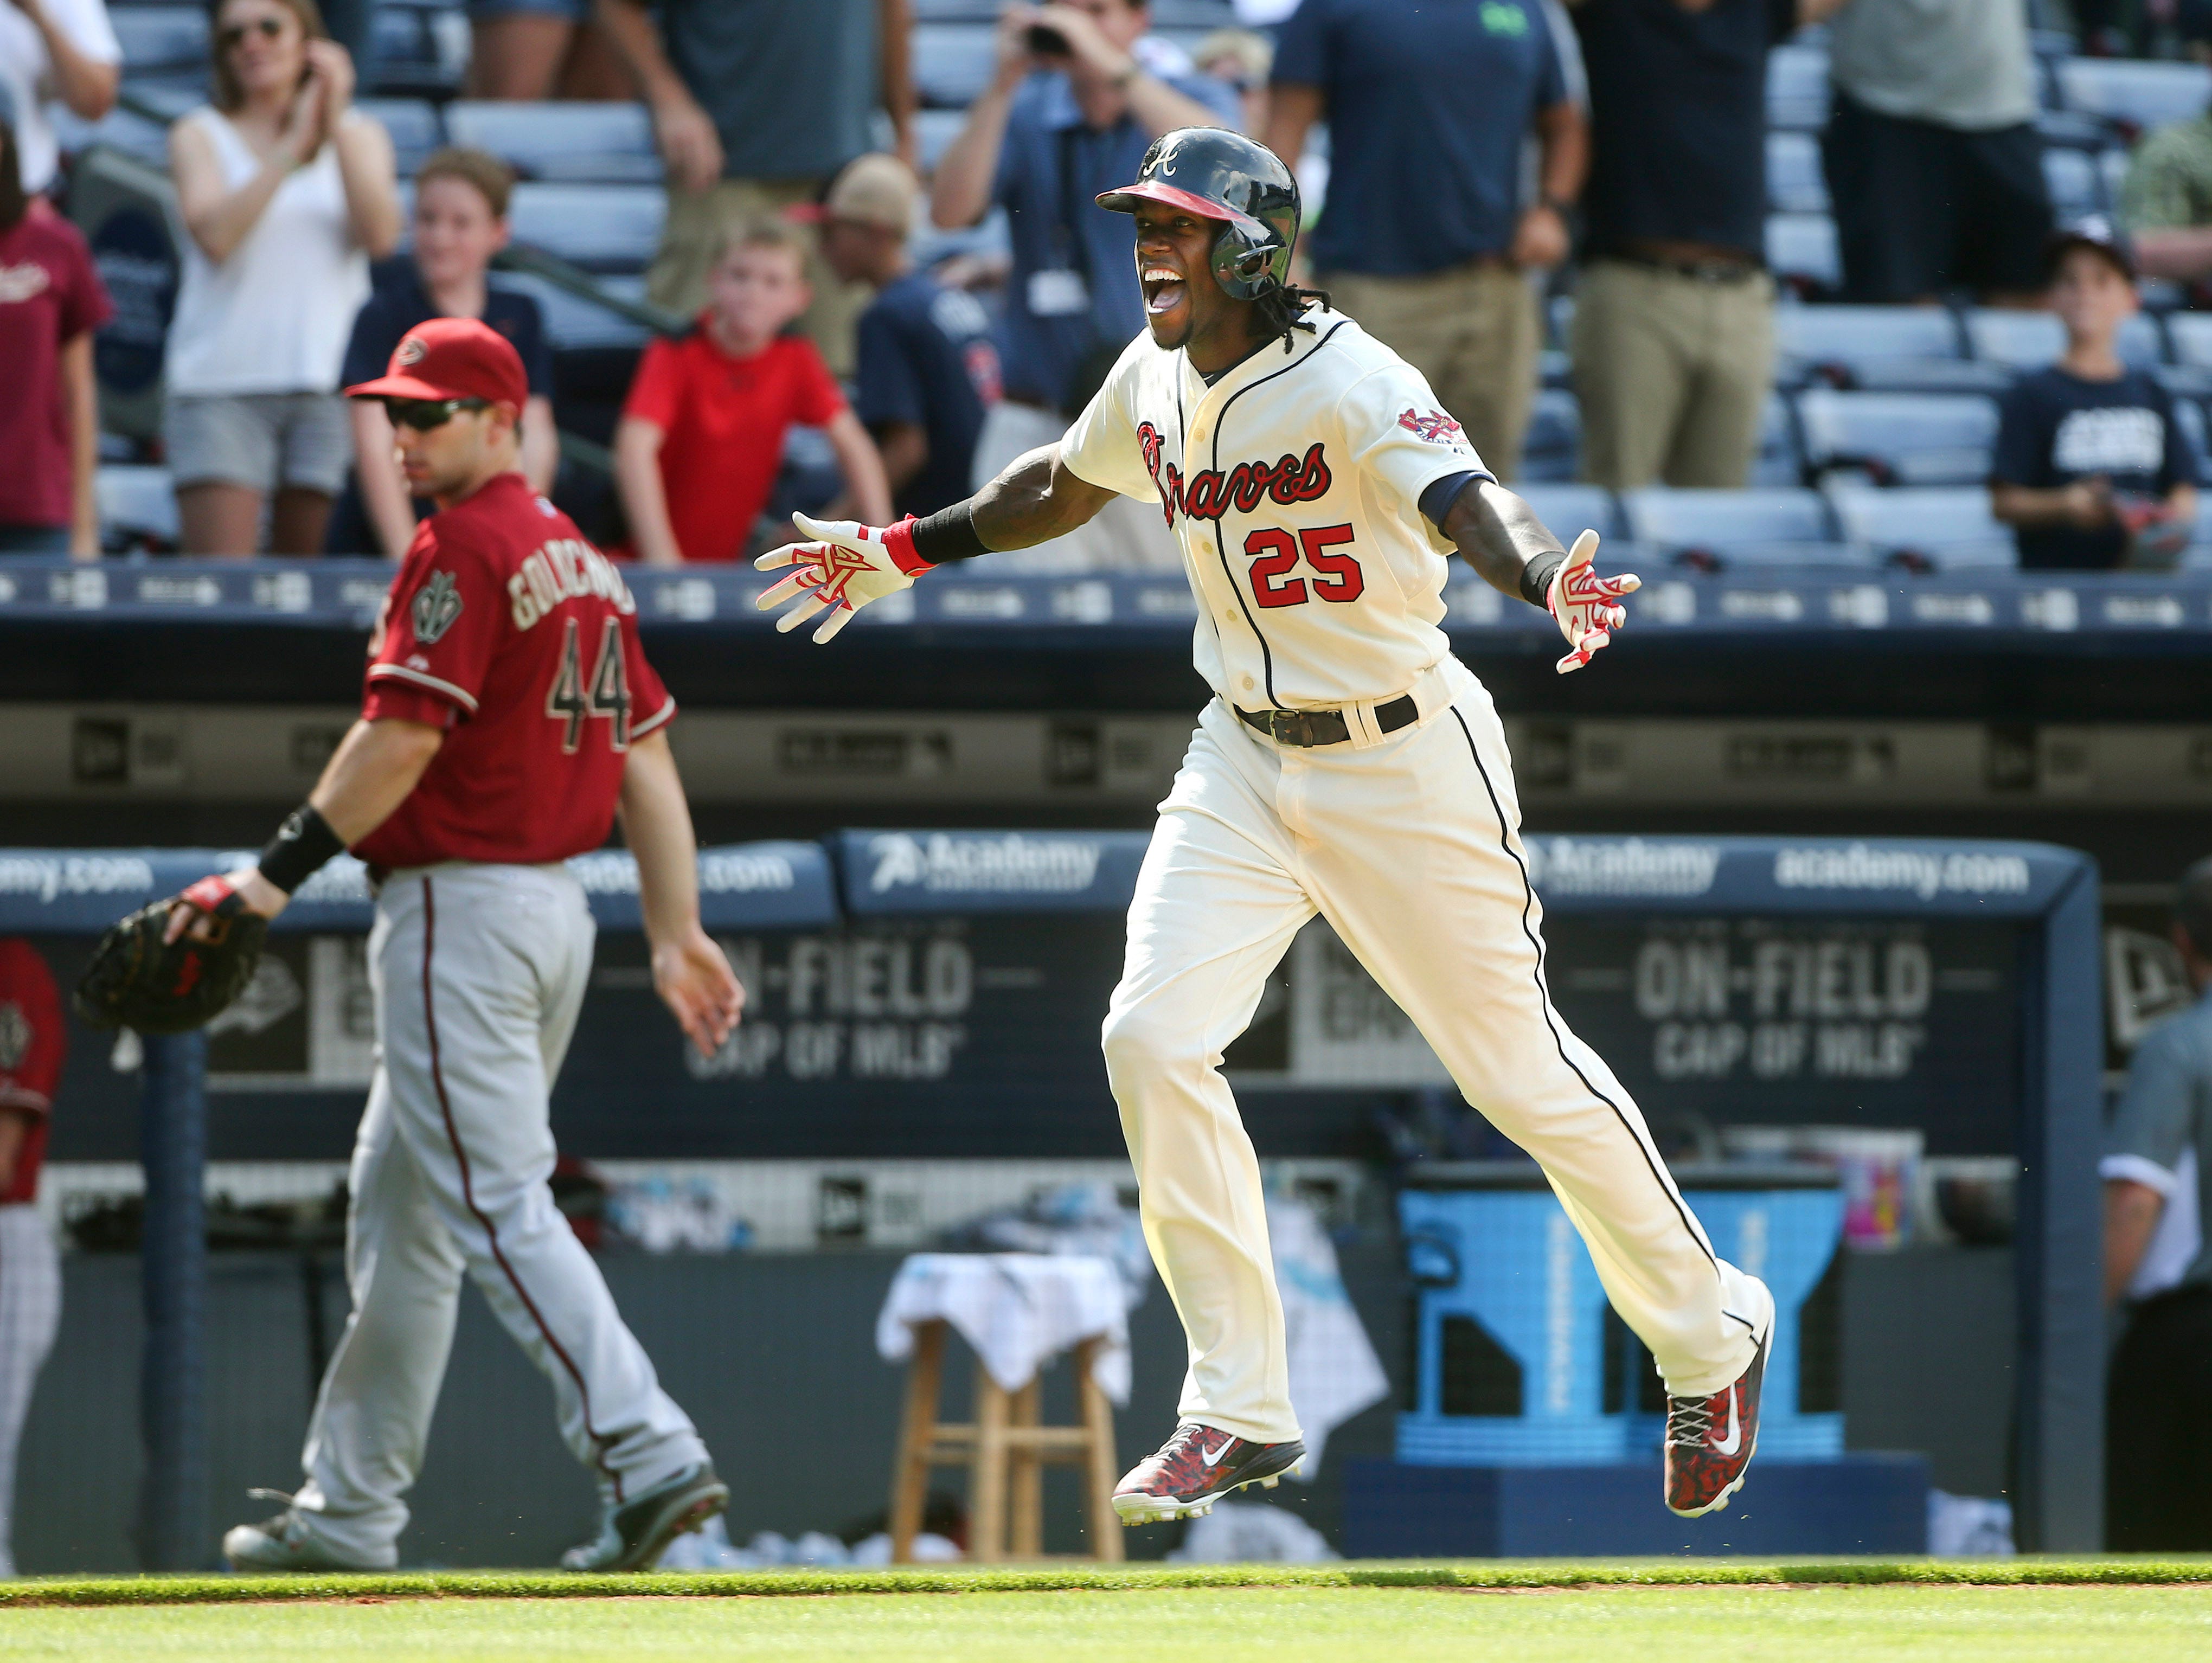 Roberson graduate Cameron Maybin is an outfielder for the Atlanta Braves.